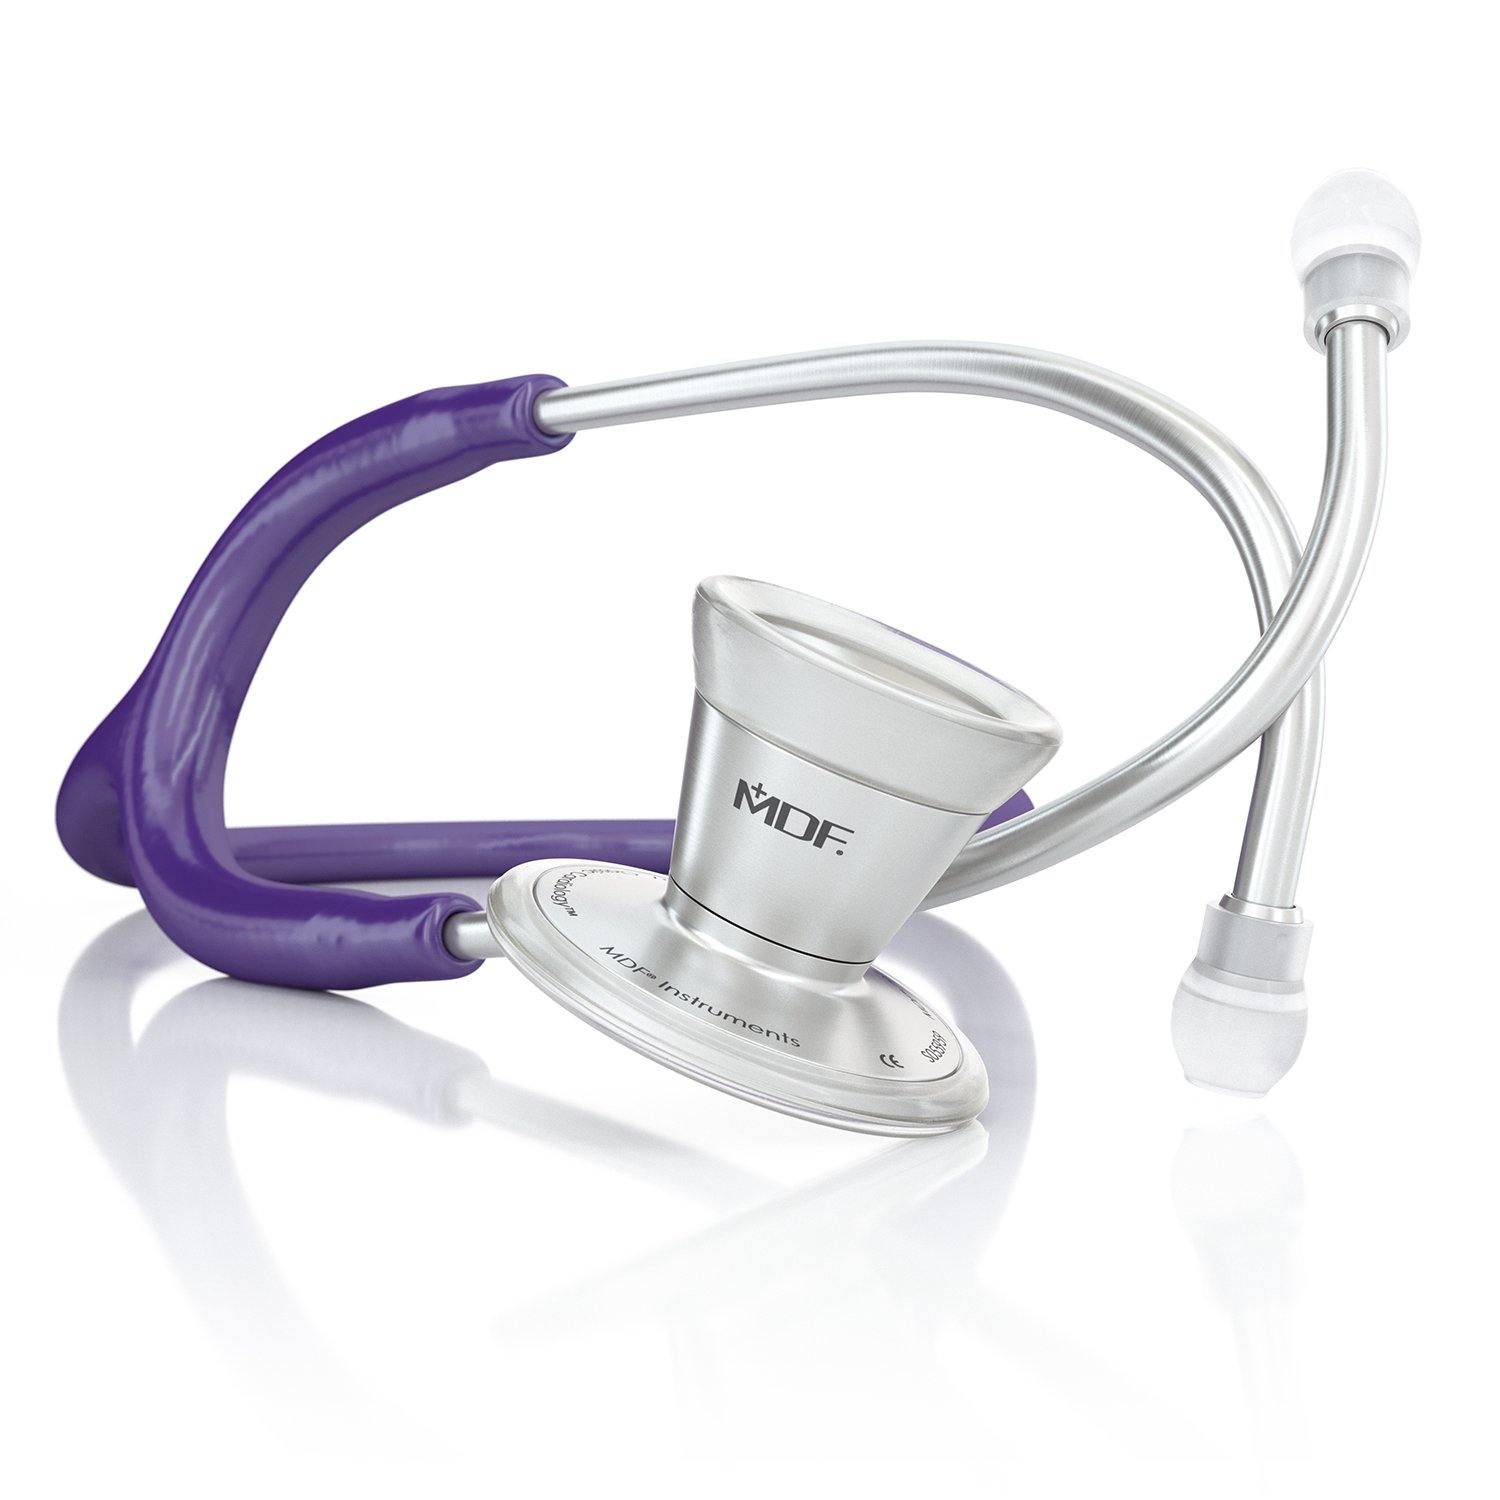 ProCardial® Stainless Steel Cardiology Stethoscope - Purple - MDF Instruments Official Store - No - Stethoscope